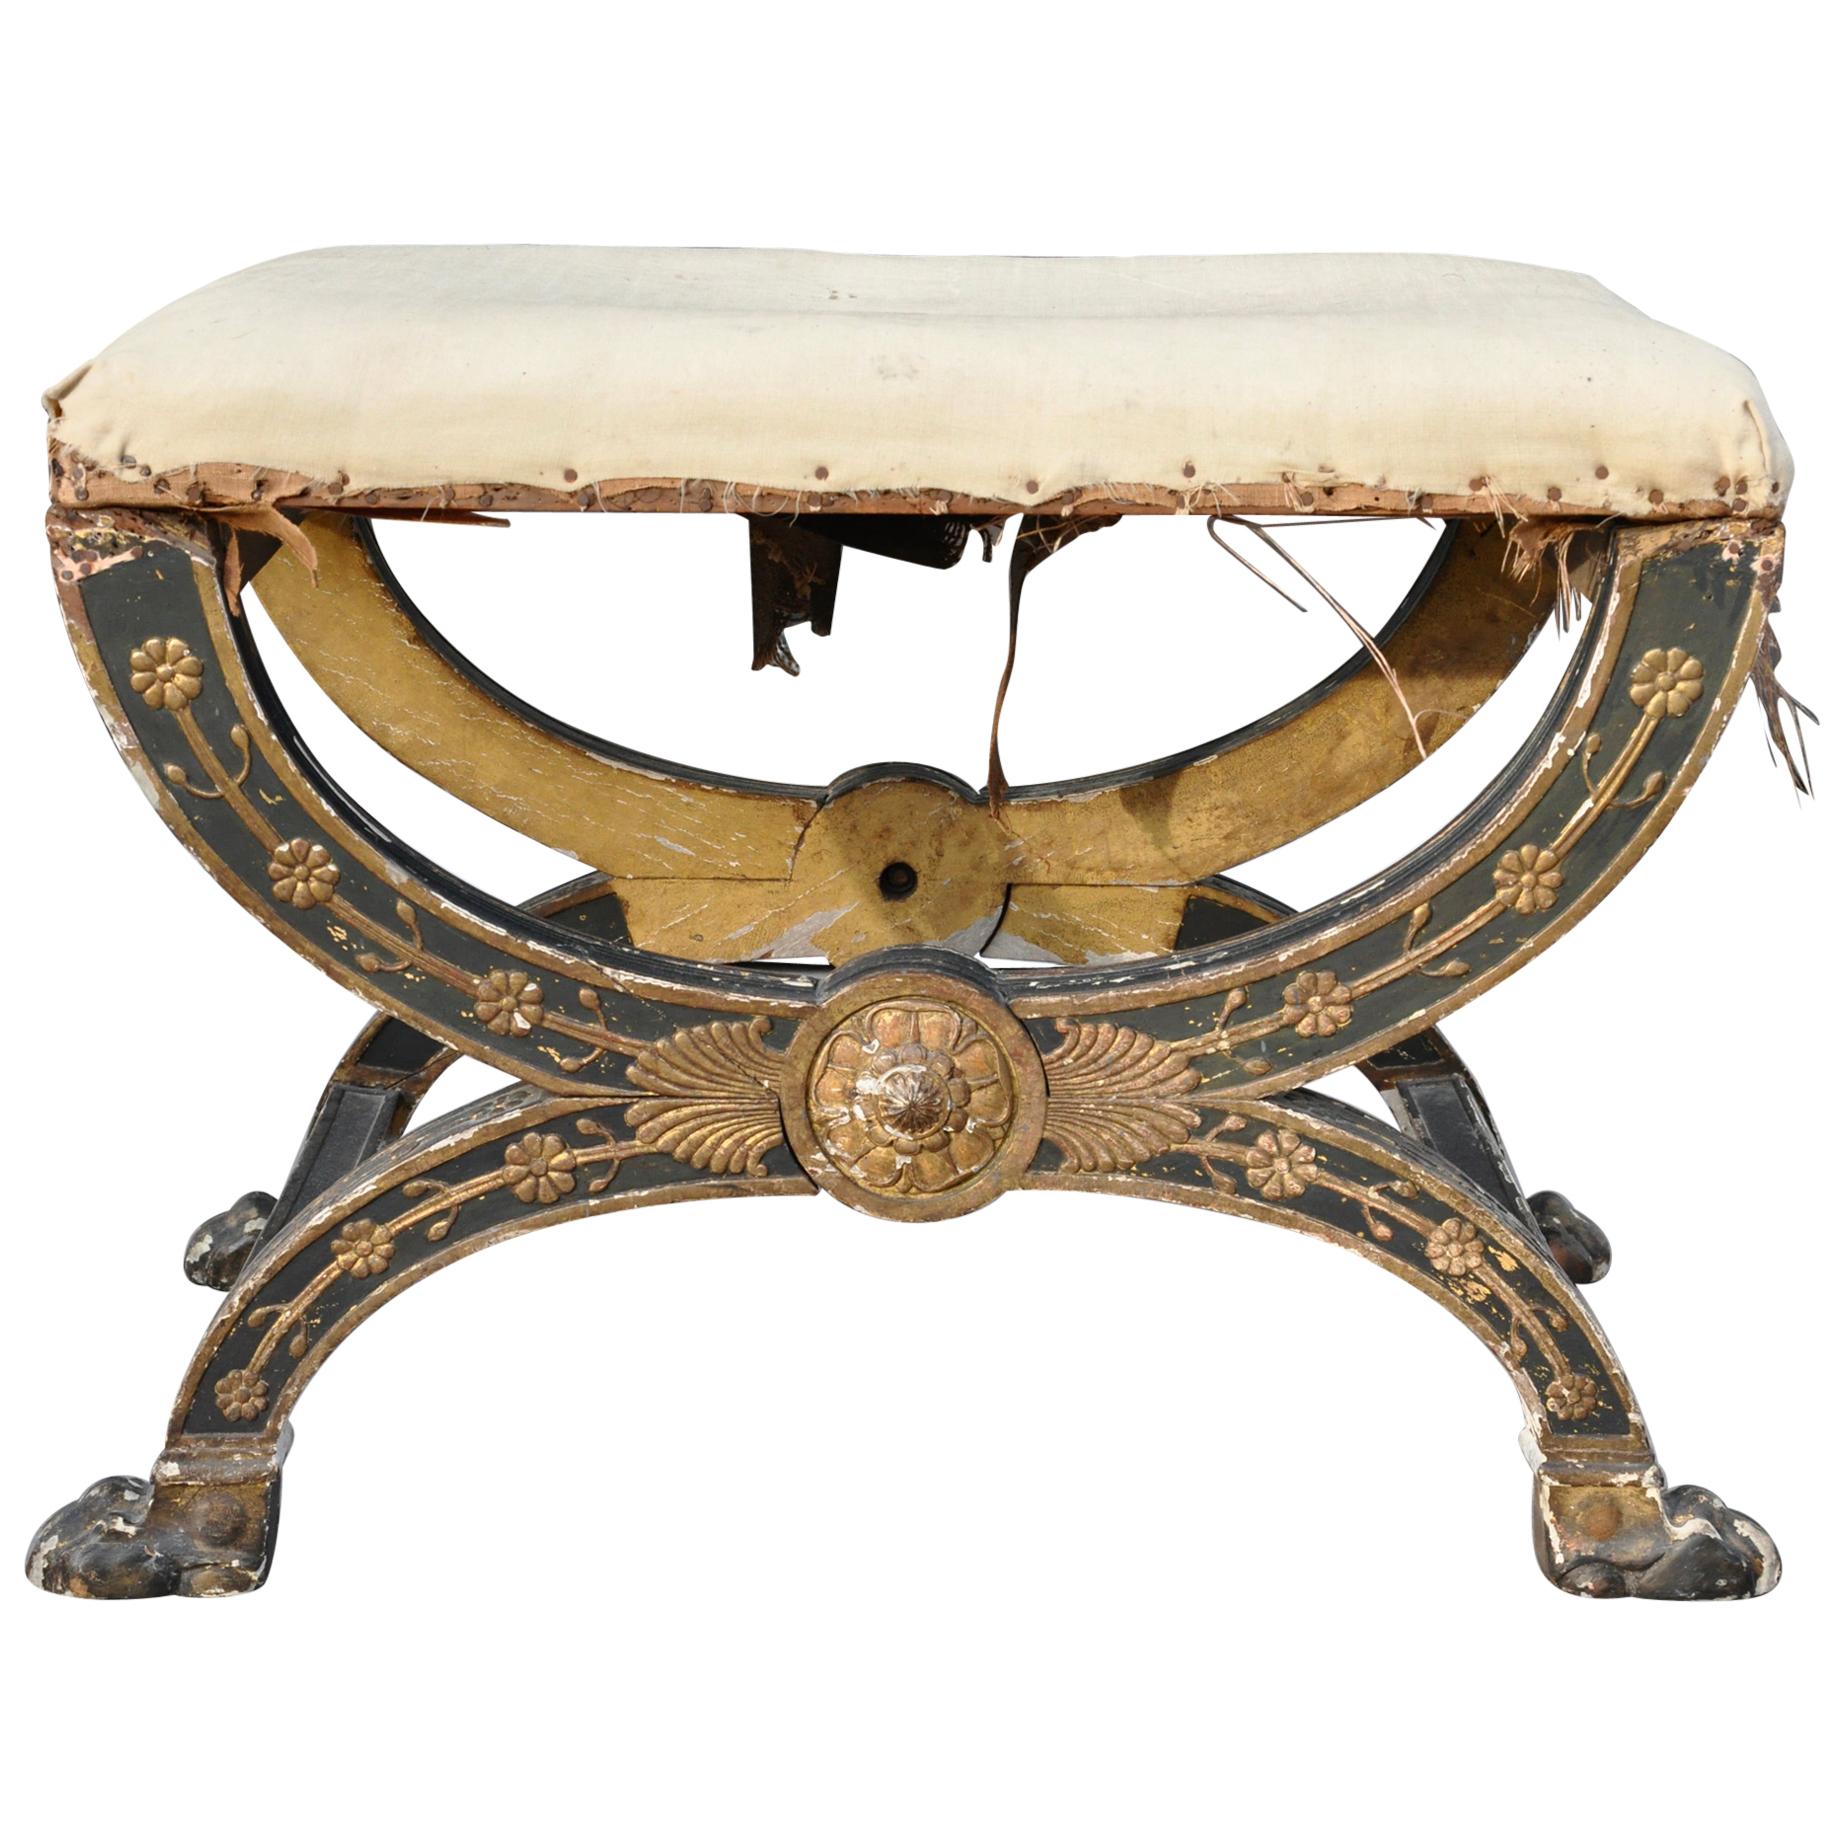 Early 19th Century French Imperial Empire Tabouret Ordered for The Tuileries